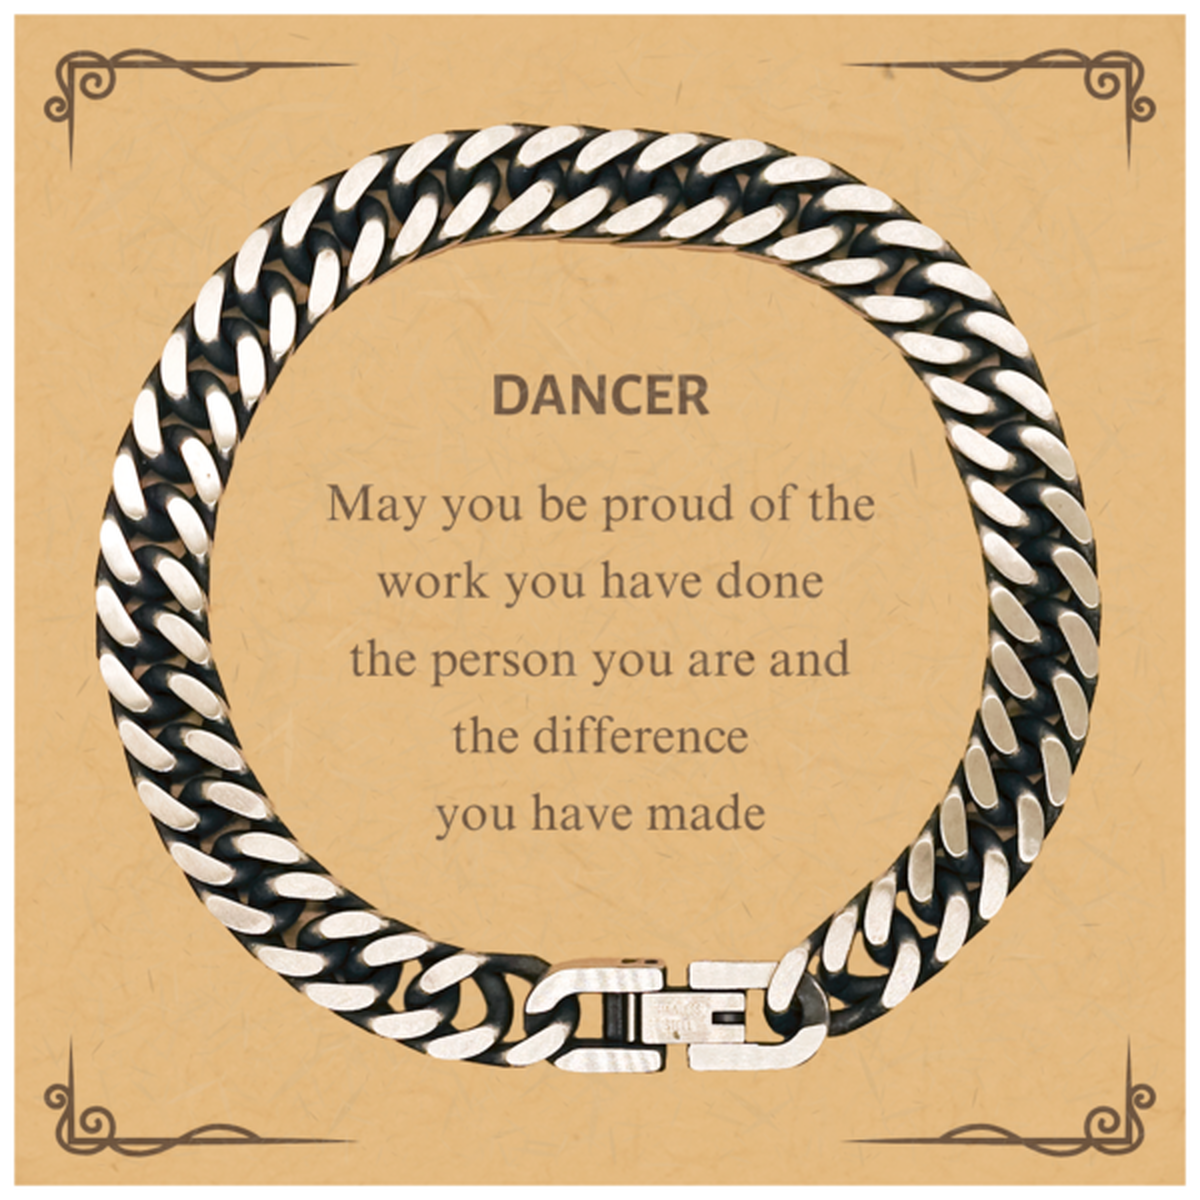 Dancer May you be proud of the work you have done, Retirement Dancer Cuban Link Chain Bracelet for Colleague Appreciation Gifts Amazing for Dancer